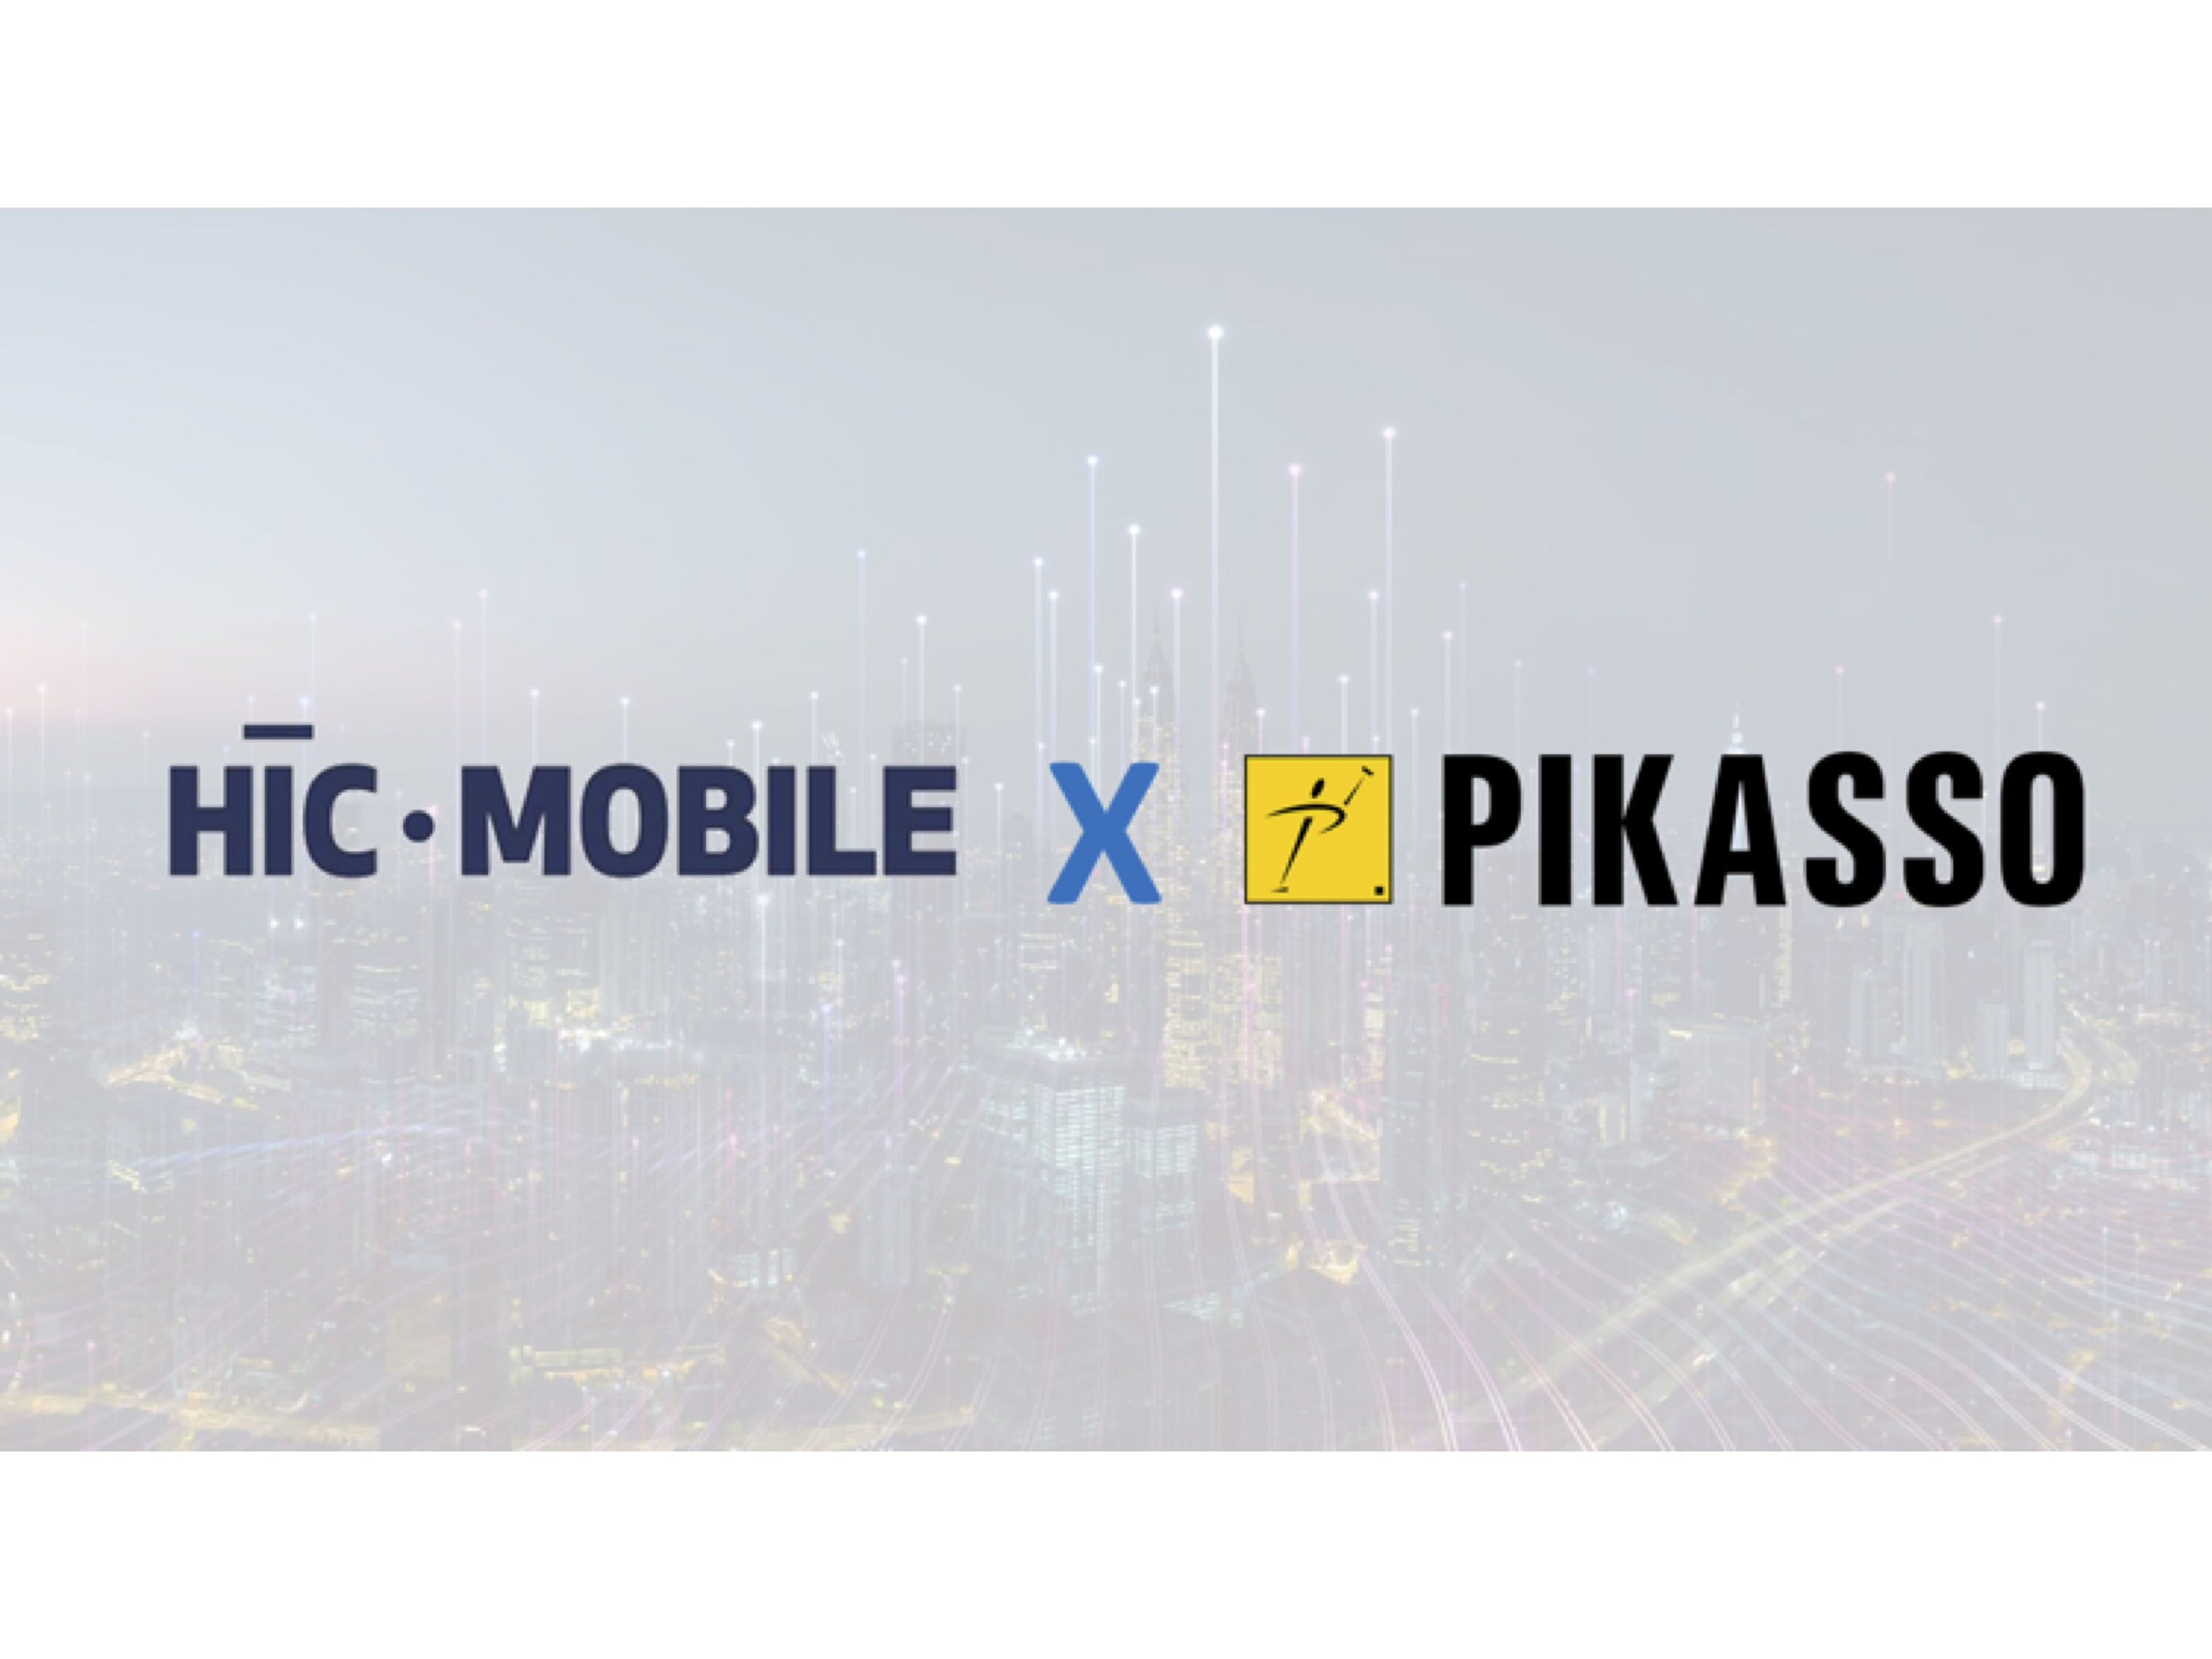 Pikasso's partnership with Hic Mobile to help amplify OOH/DOOH campaign's reach and performance via mobile advertising